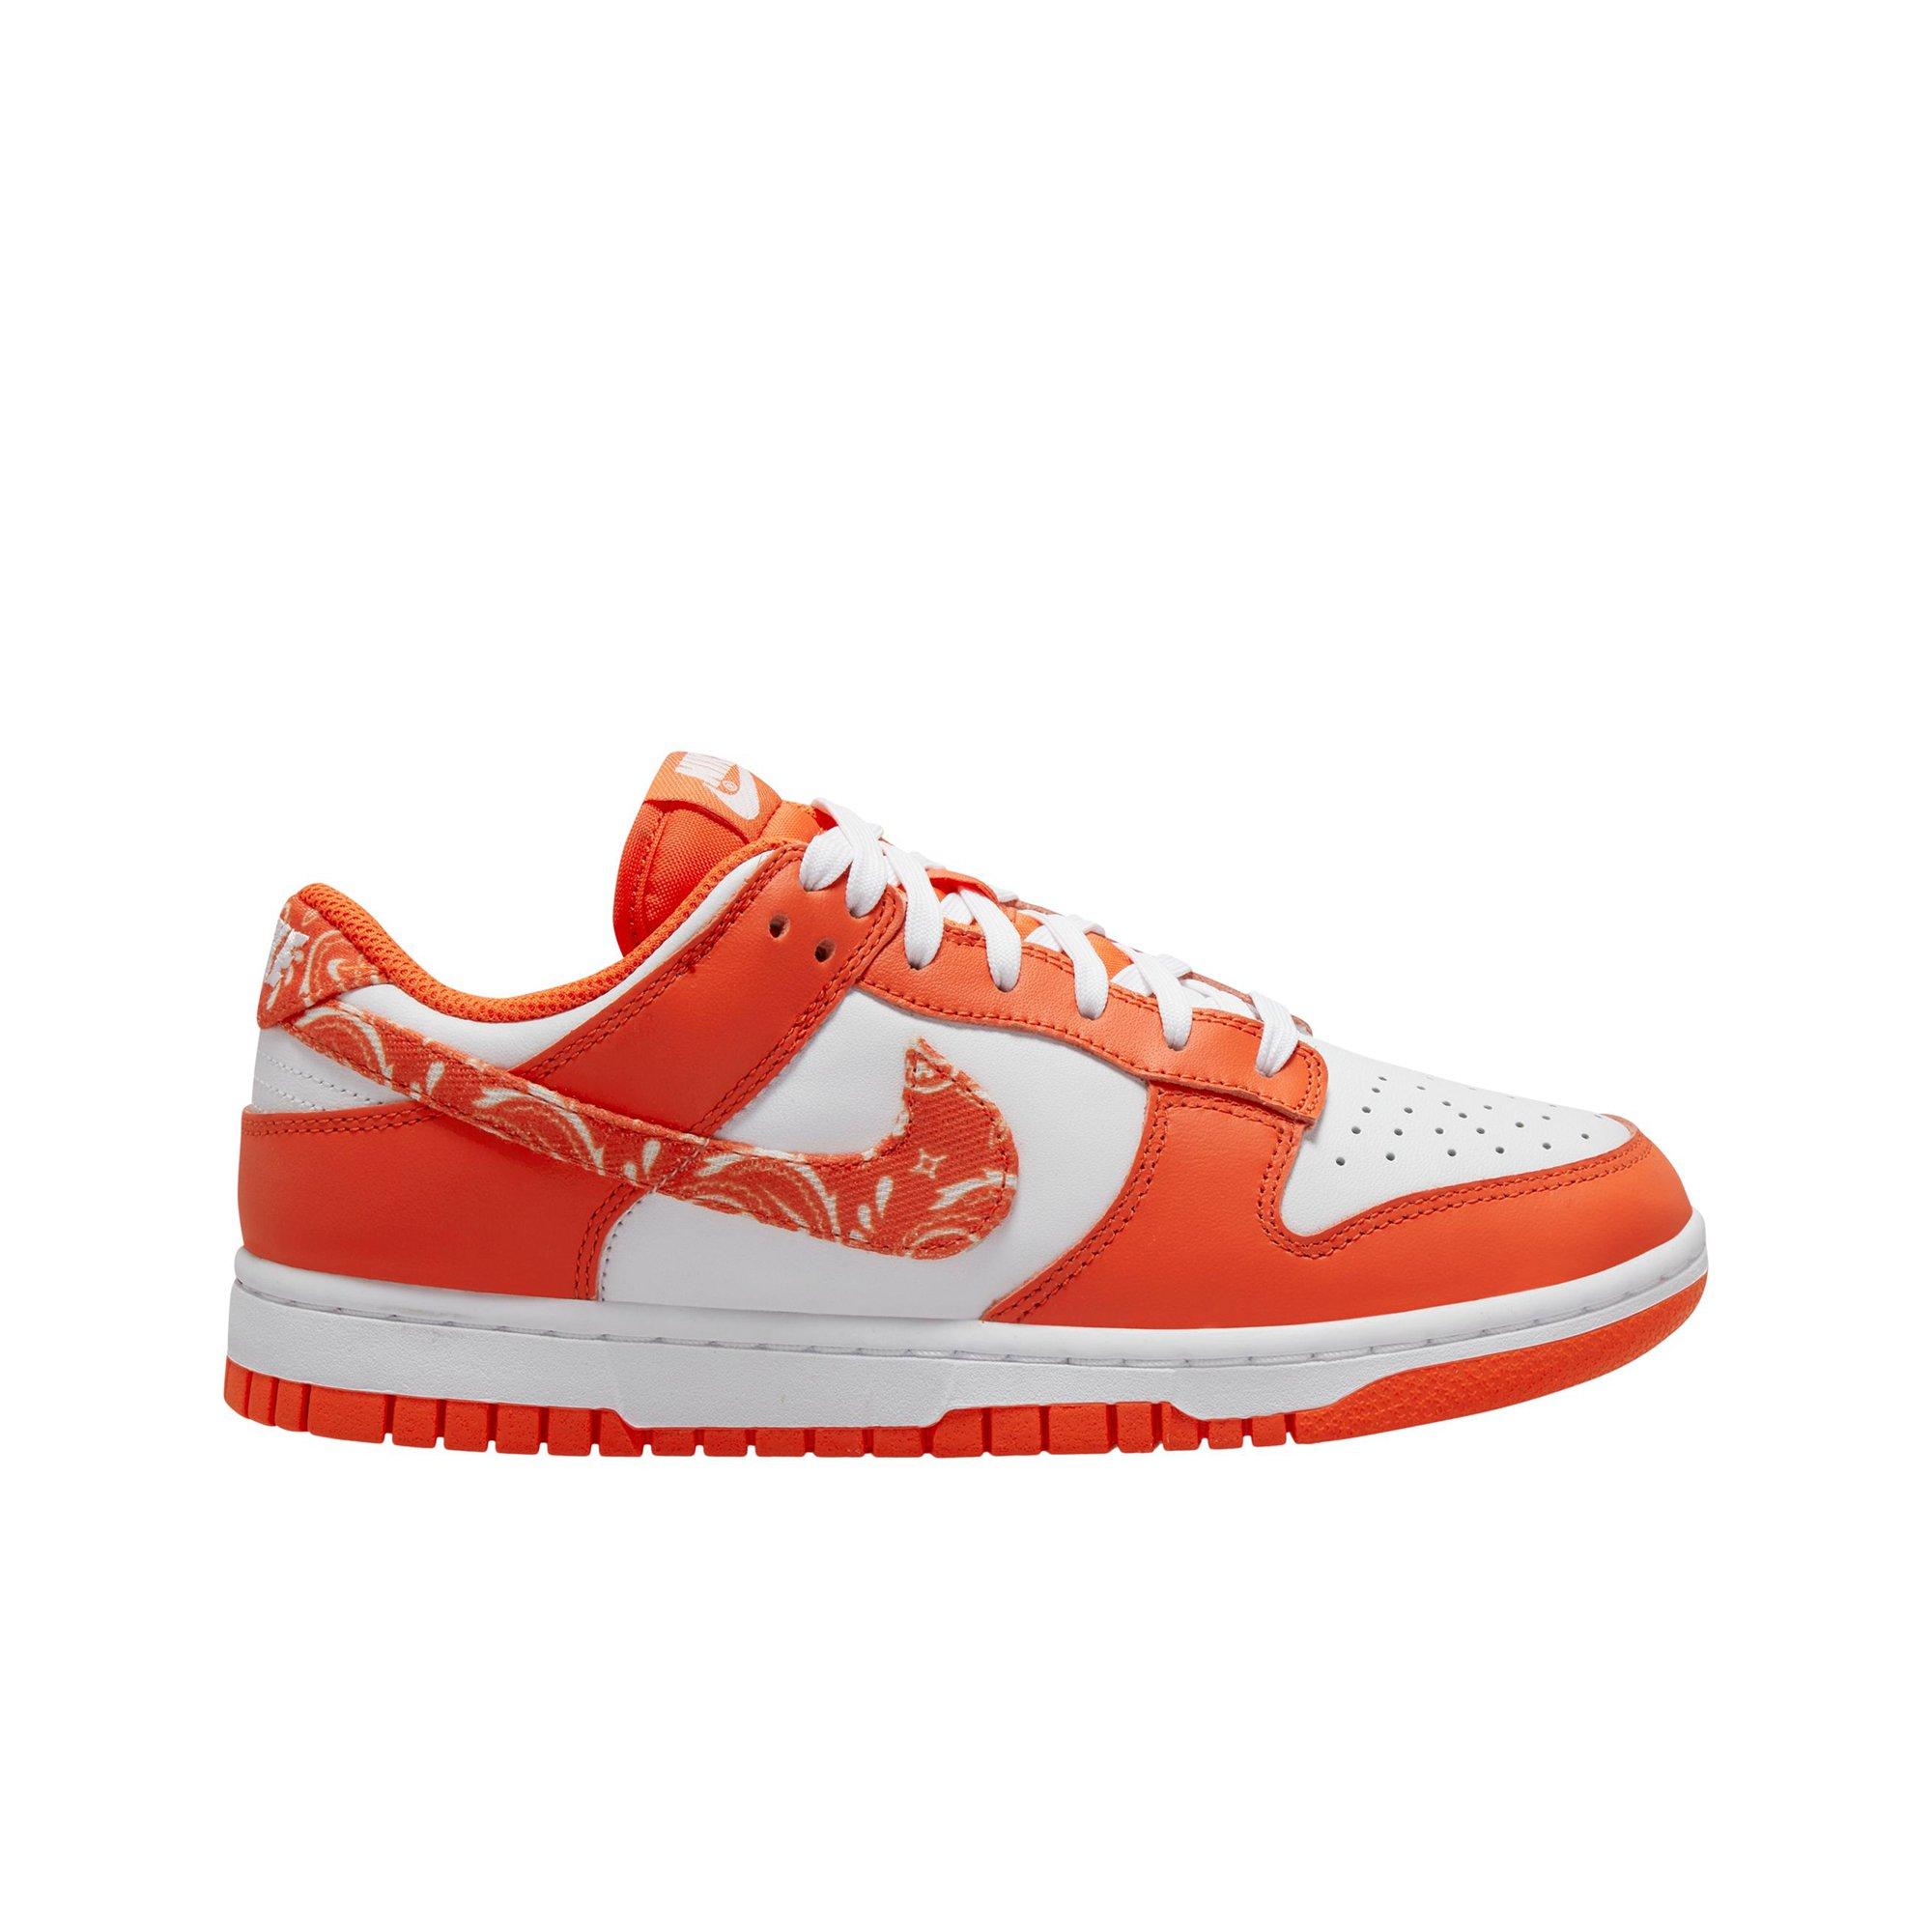 Women's Nike Dunk Low 'Total Orange' Click link in bio to purchase